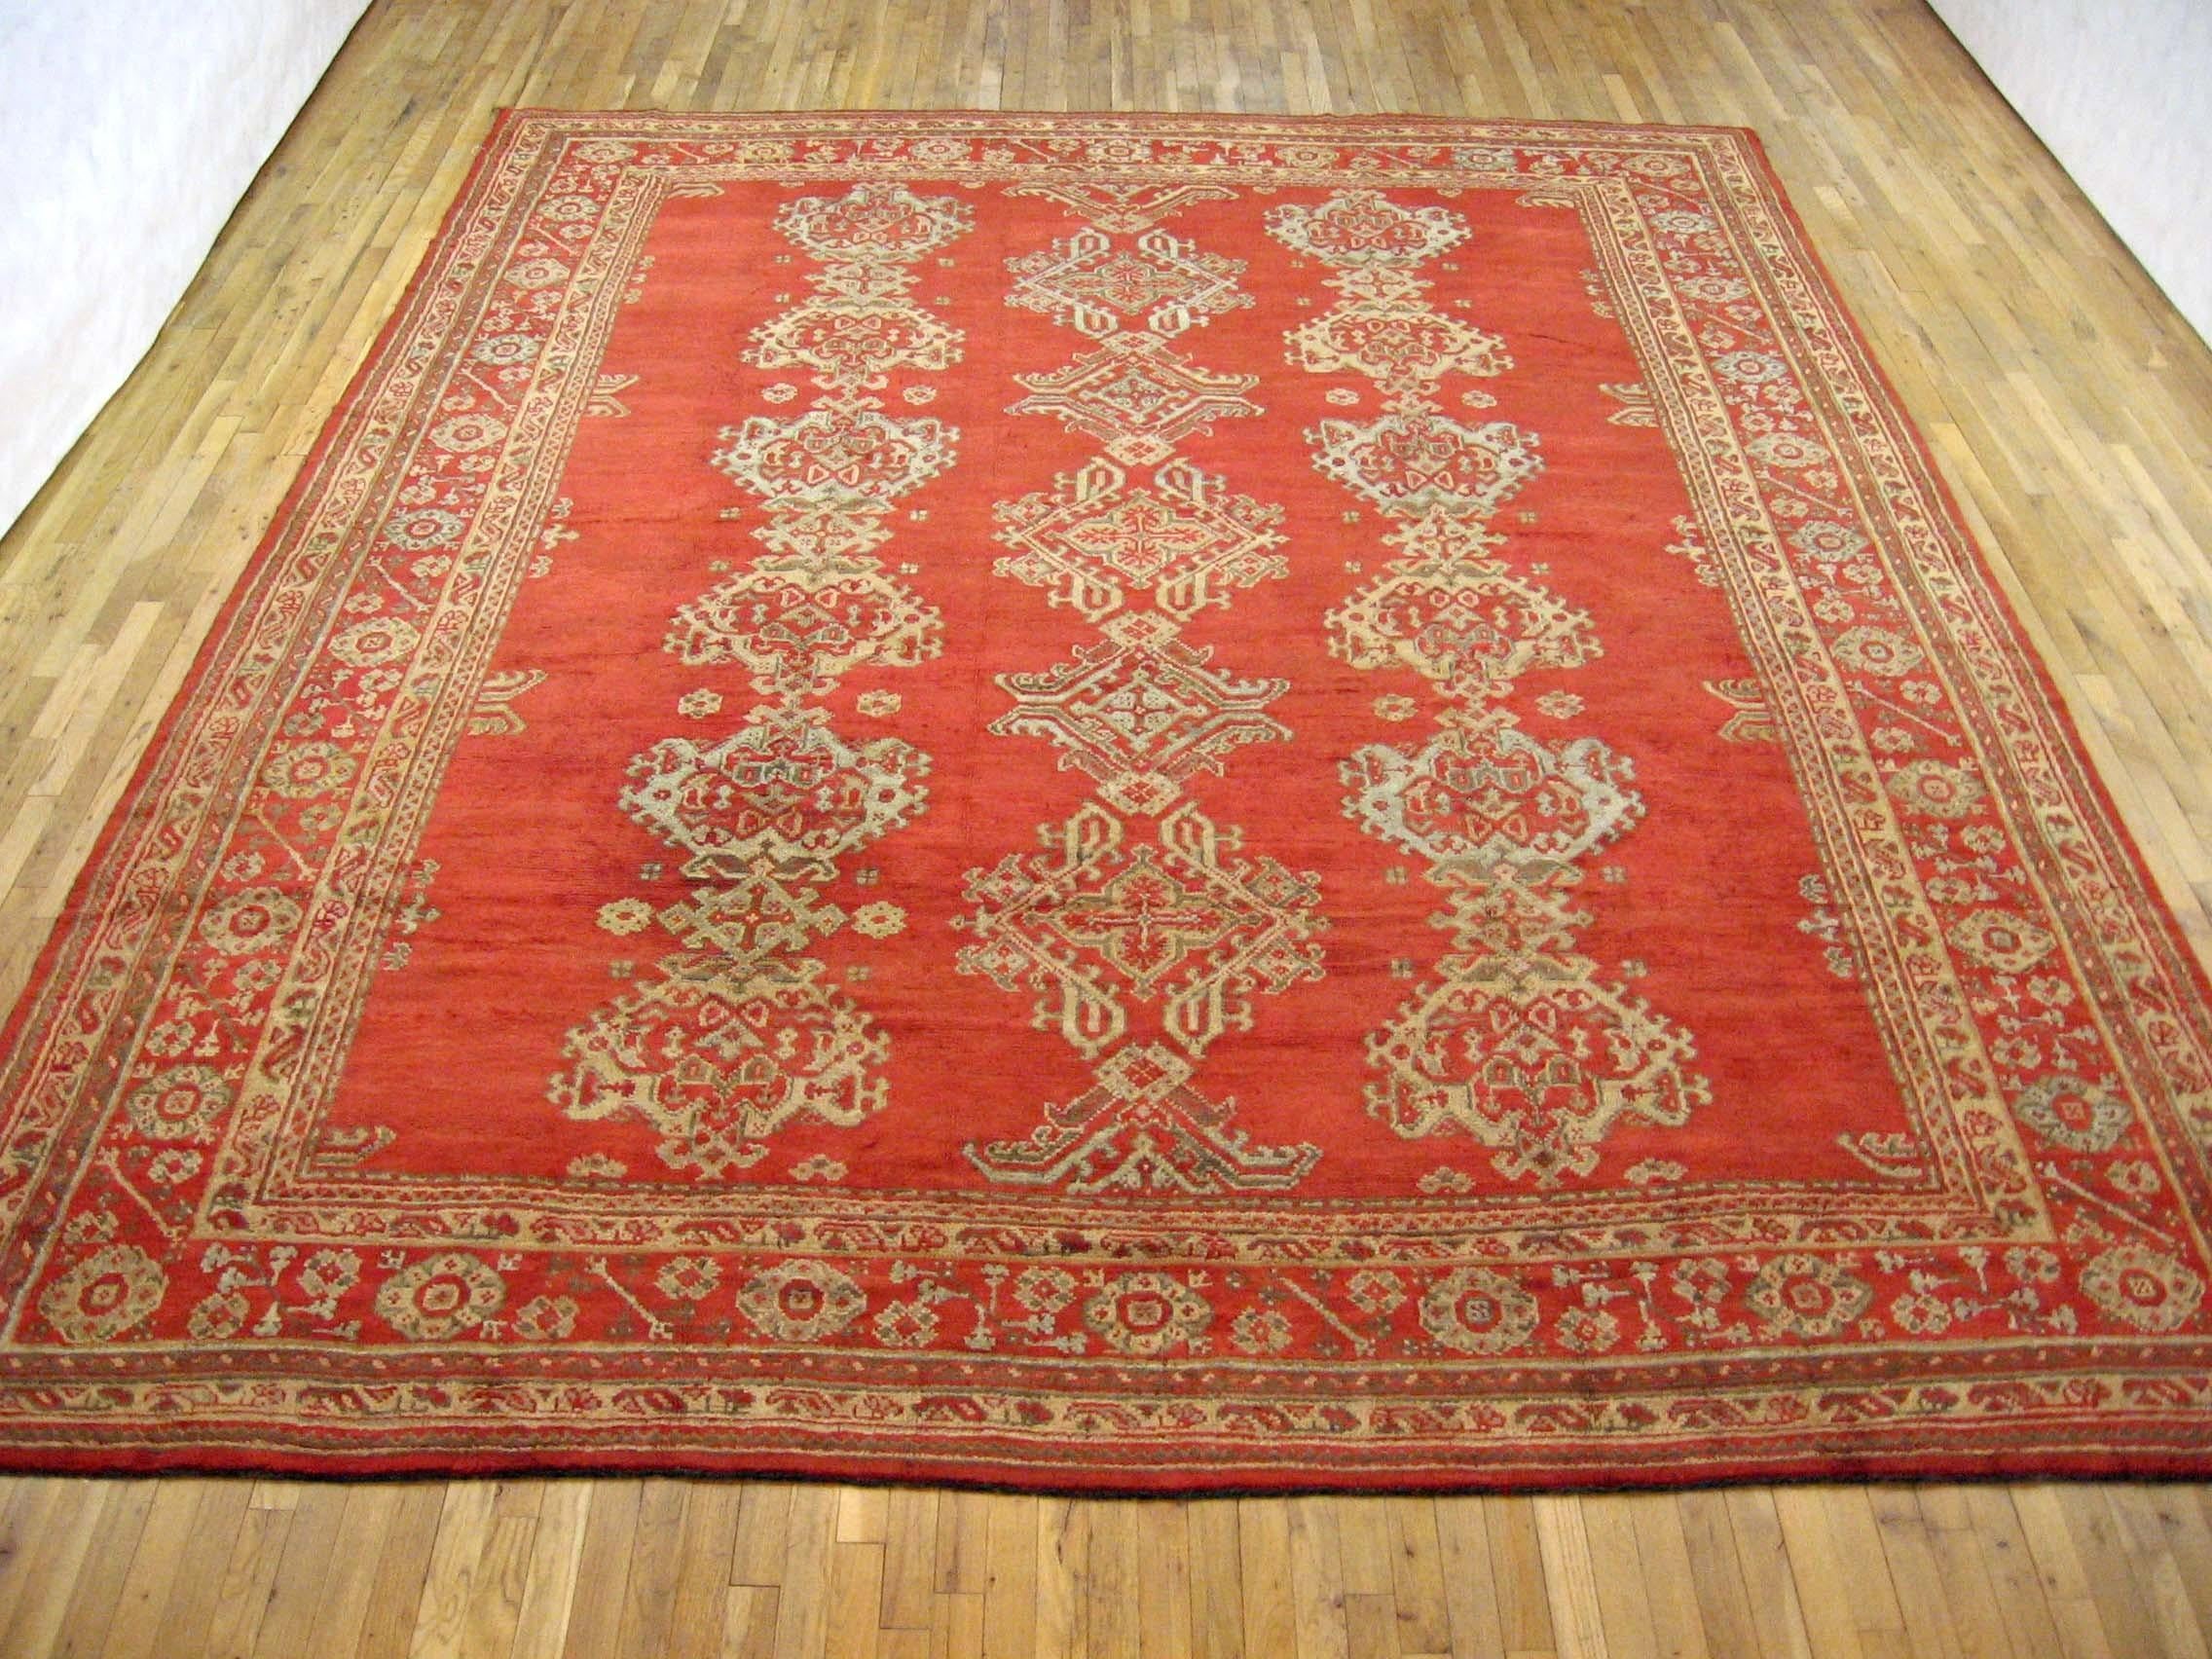 Antique Turkish Oushak Decorative Oriental Carpet, Room size, with Red Field

A gorgeous antique Turkish Oushak carpet, circa 1920, size 13'5 x 10'7. This lovely carpet features multiple medallions in an open field in the red central field. The red